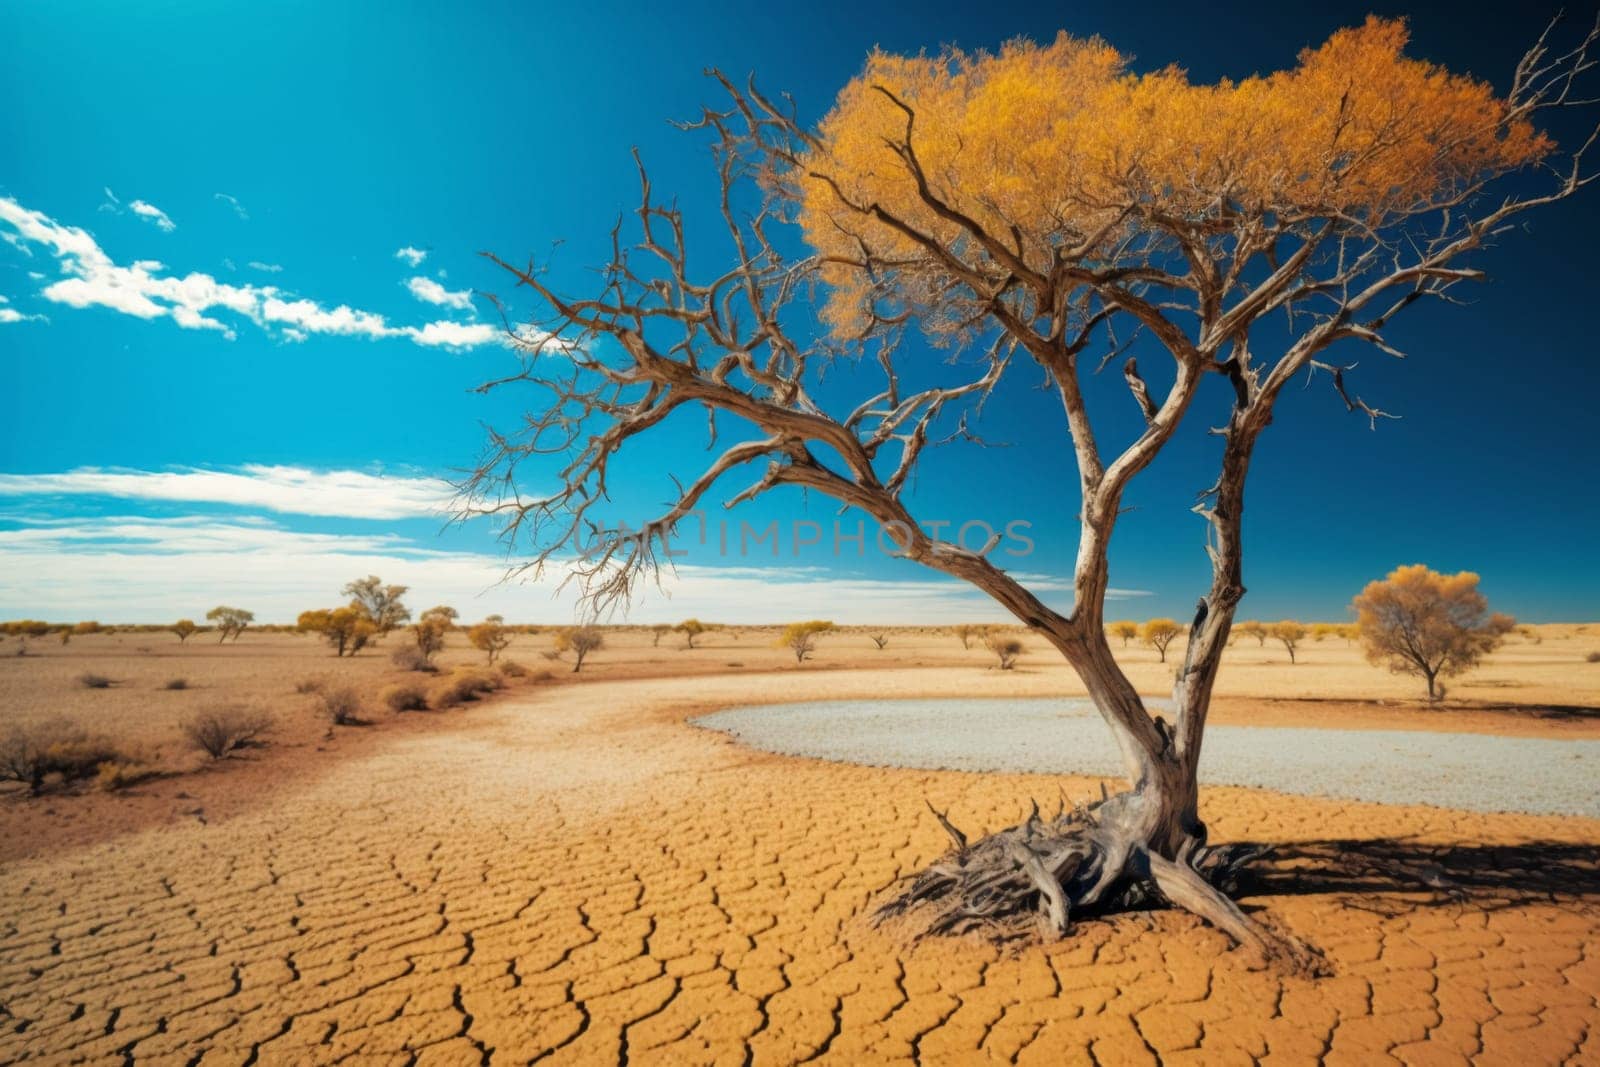 A desolate scene with a single tree standing tall amidst a cracked earth landscape under a vivid blue sky, symbolizing resilience